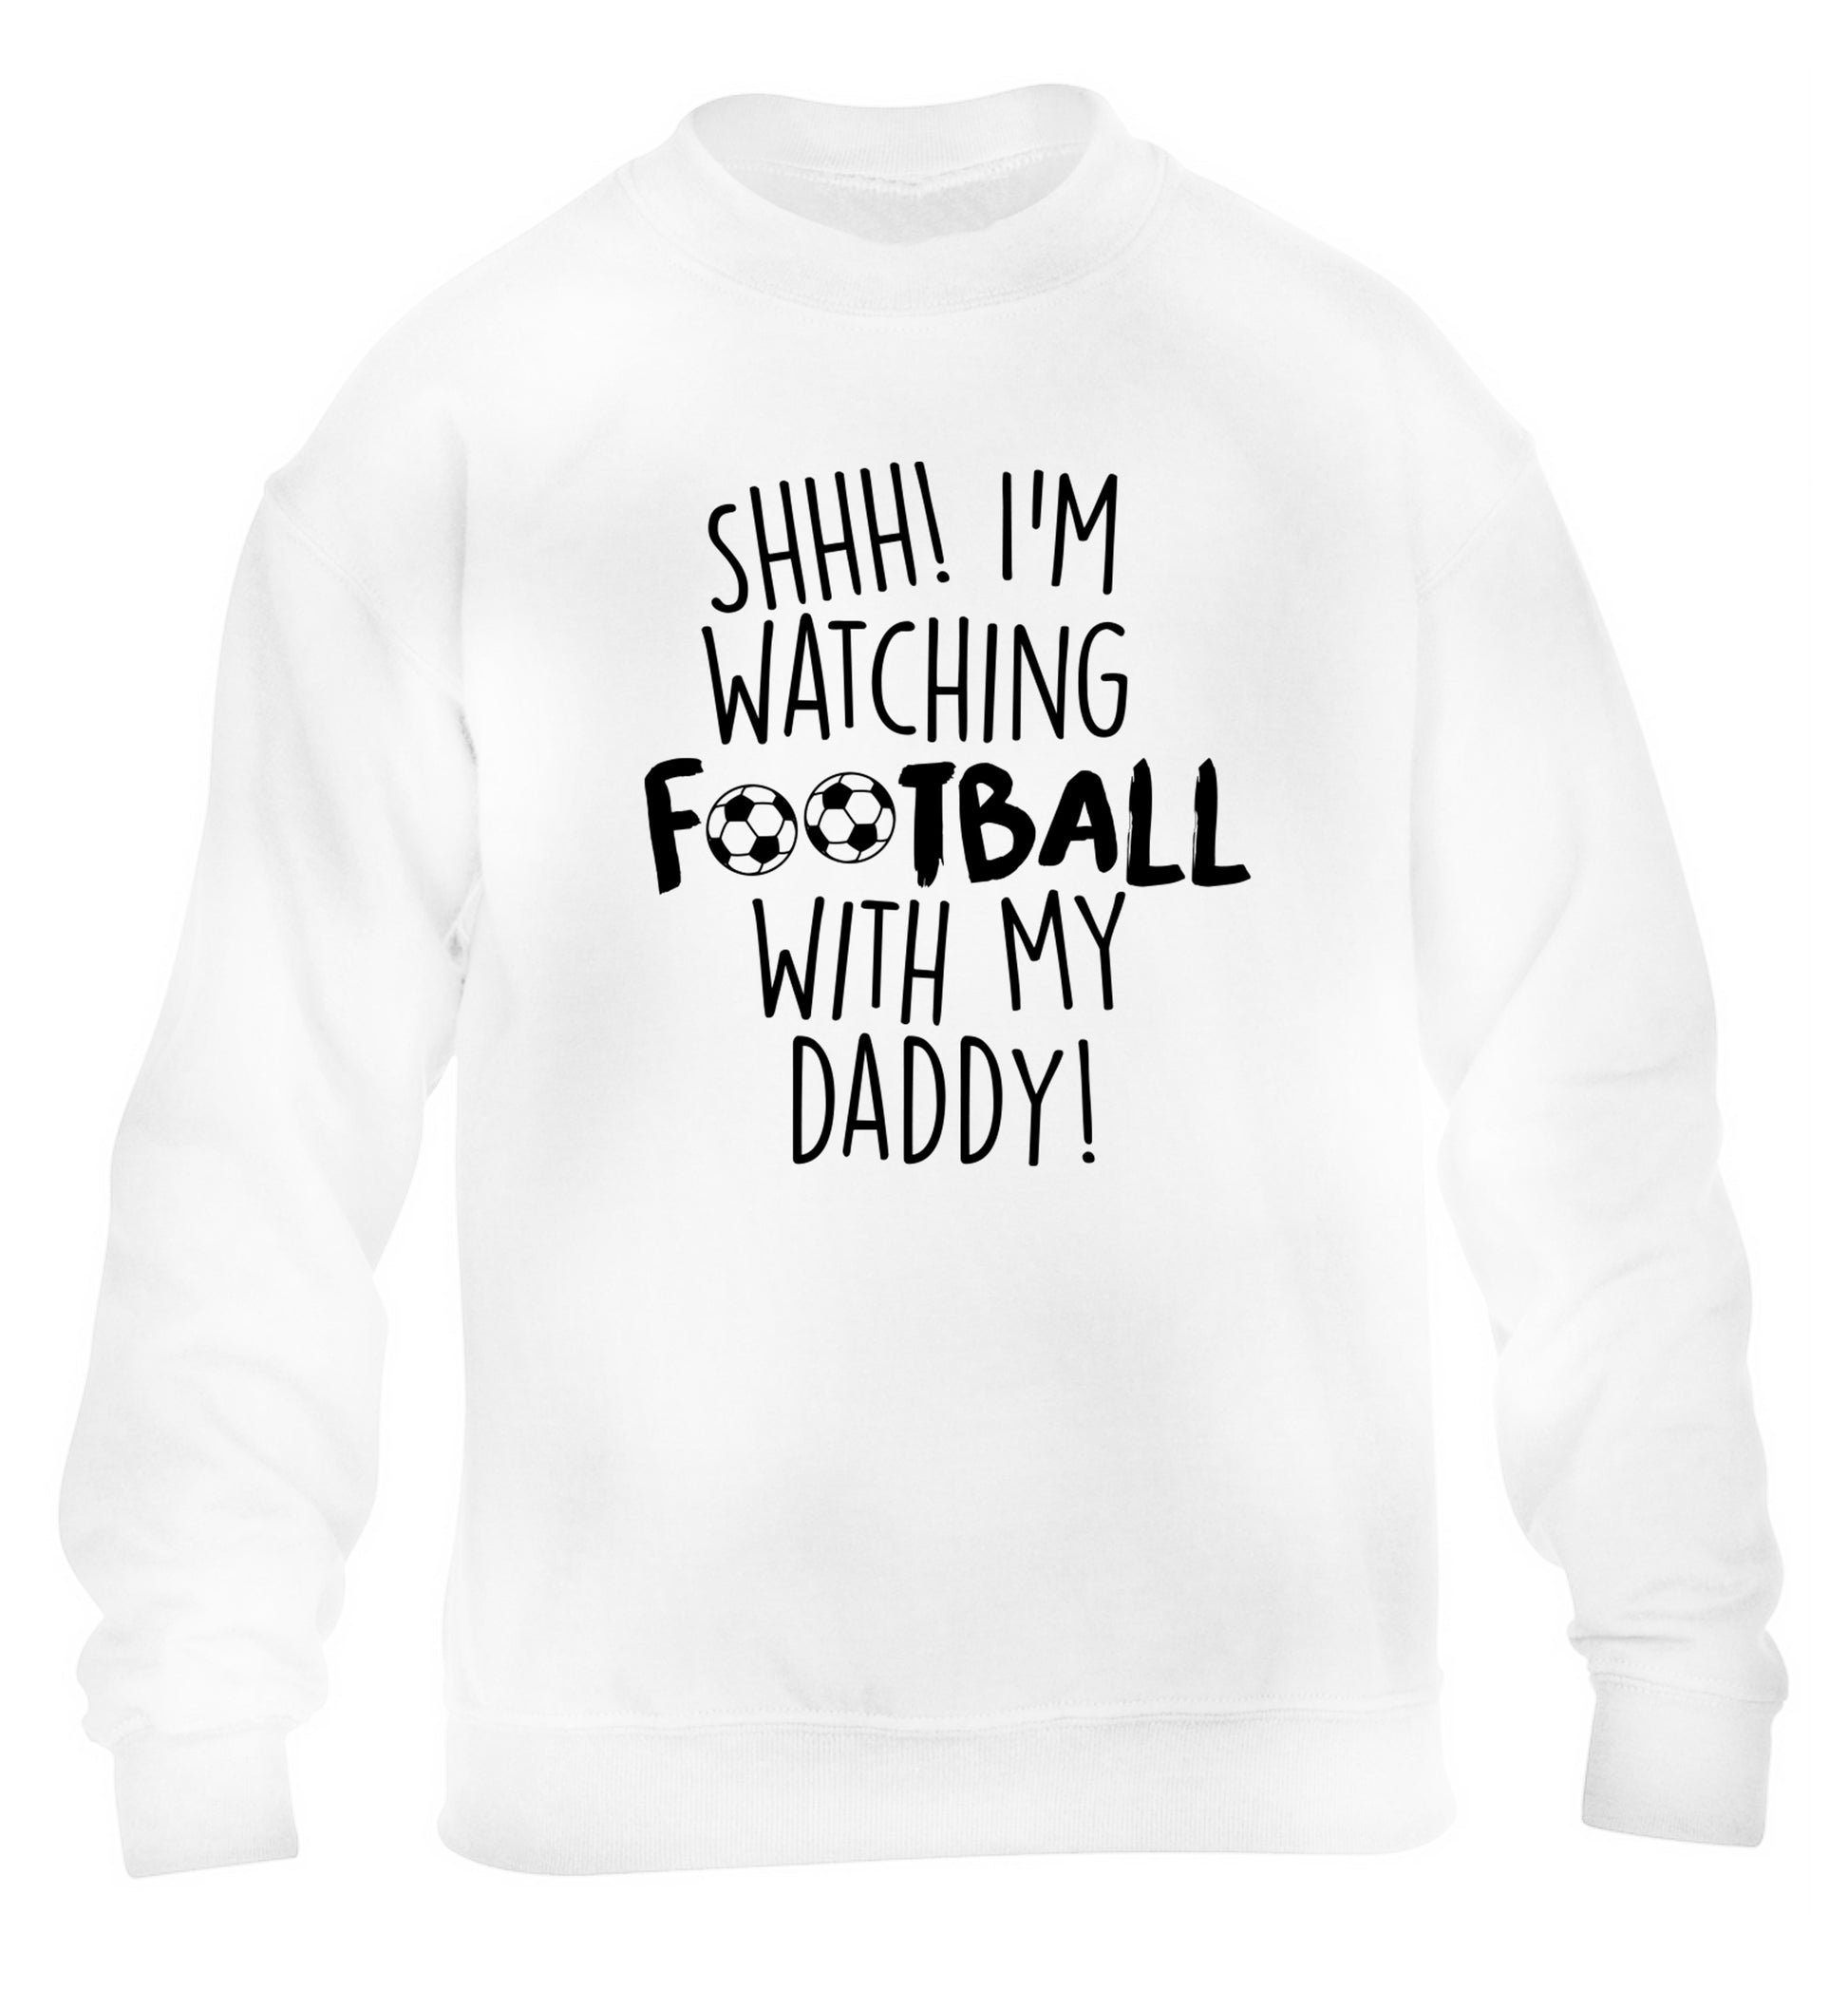 Shhh I'm watching football with my daddy children's white sweater 12-14 Years